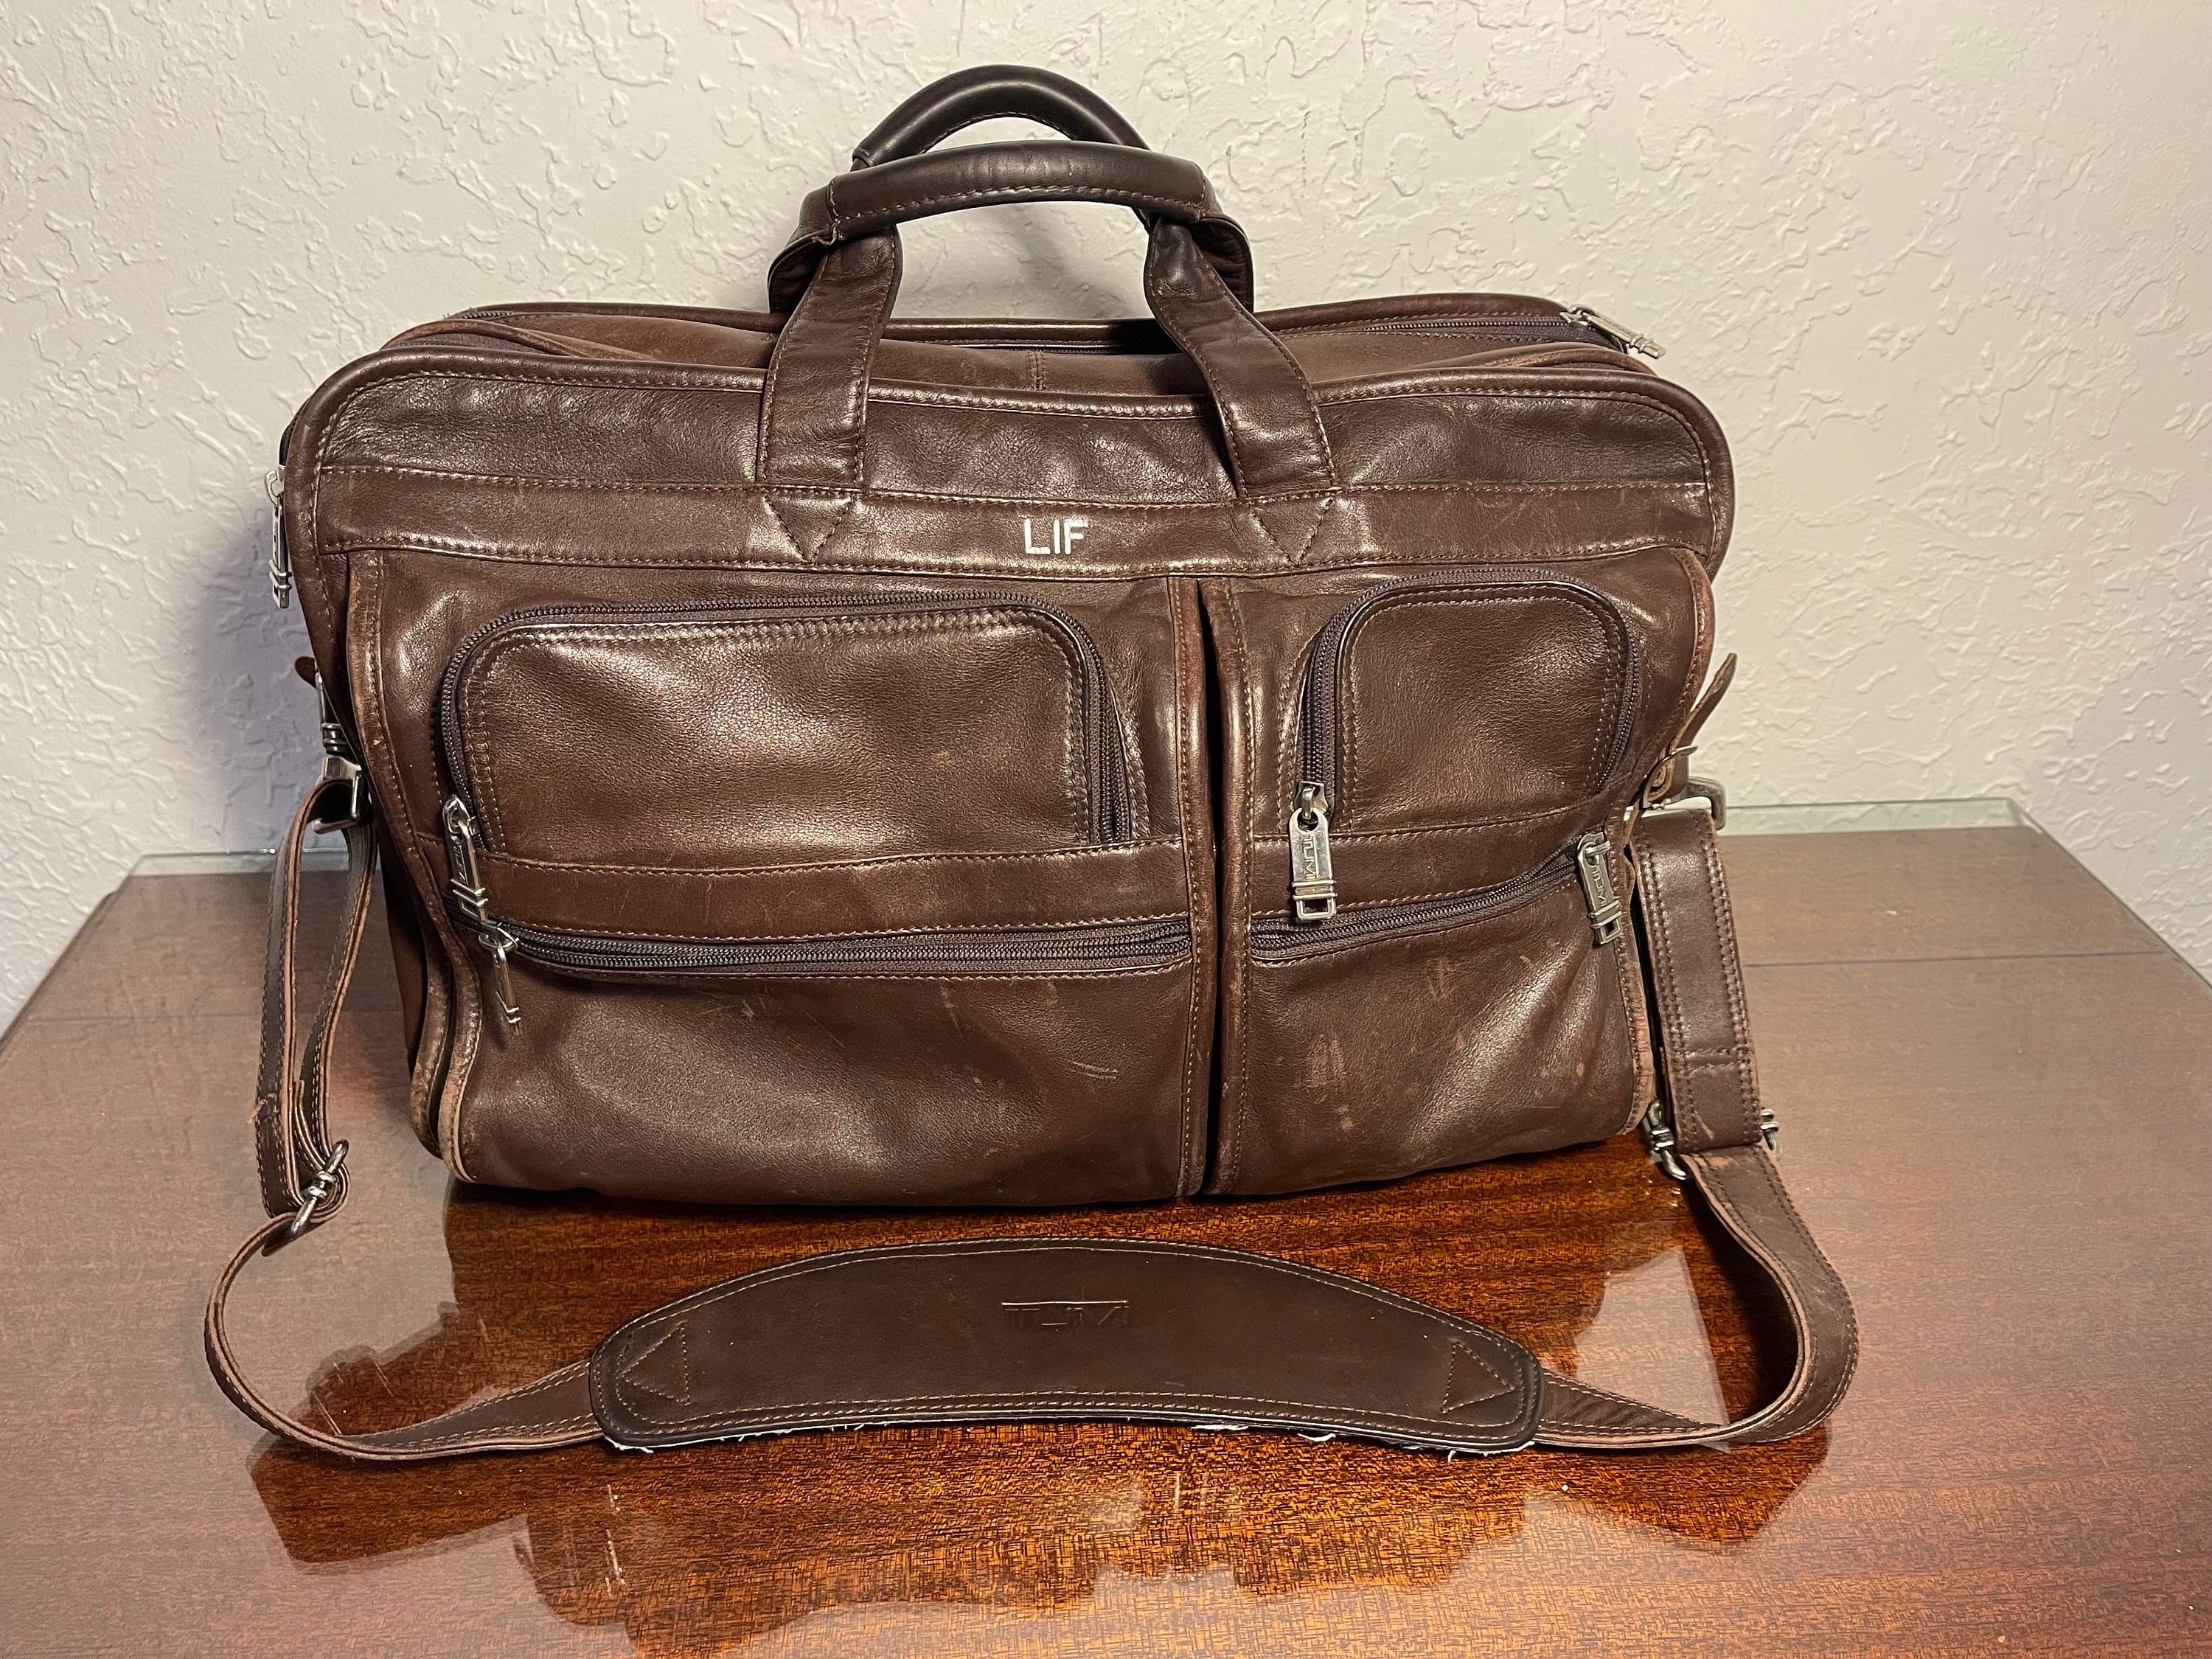 Tumi Brown Leather Expandable Attaché Briefcase Travel - Etsy